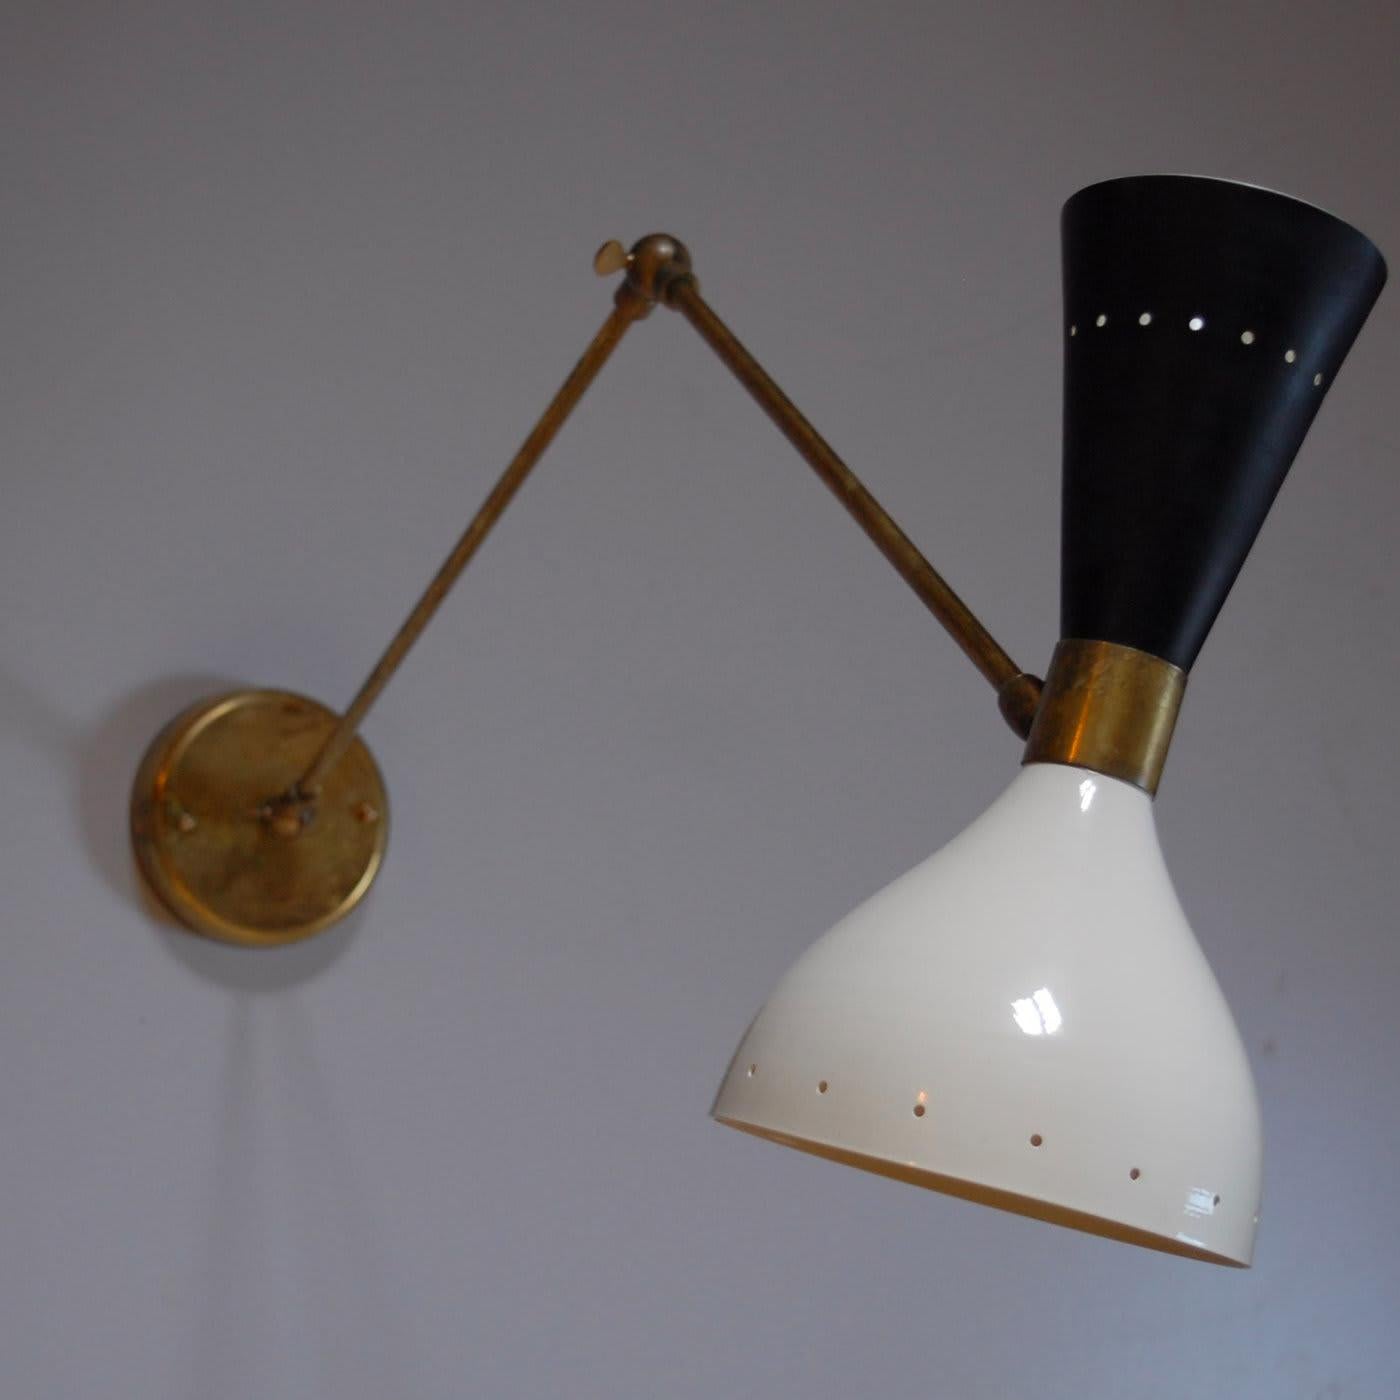 A dynamic addition to a modern home, this sconce can be an accent piece in an entryway, or in pair flank a mirror or a sofa in a living room. Its brass structure features two moving joints and a third operated by a thumb key. The base can move at a